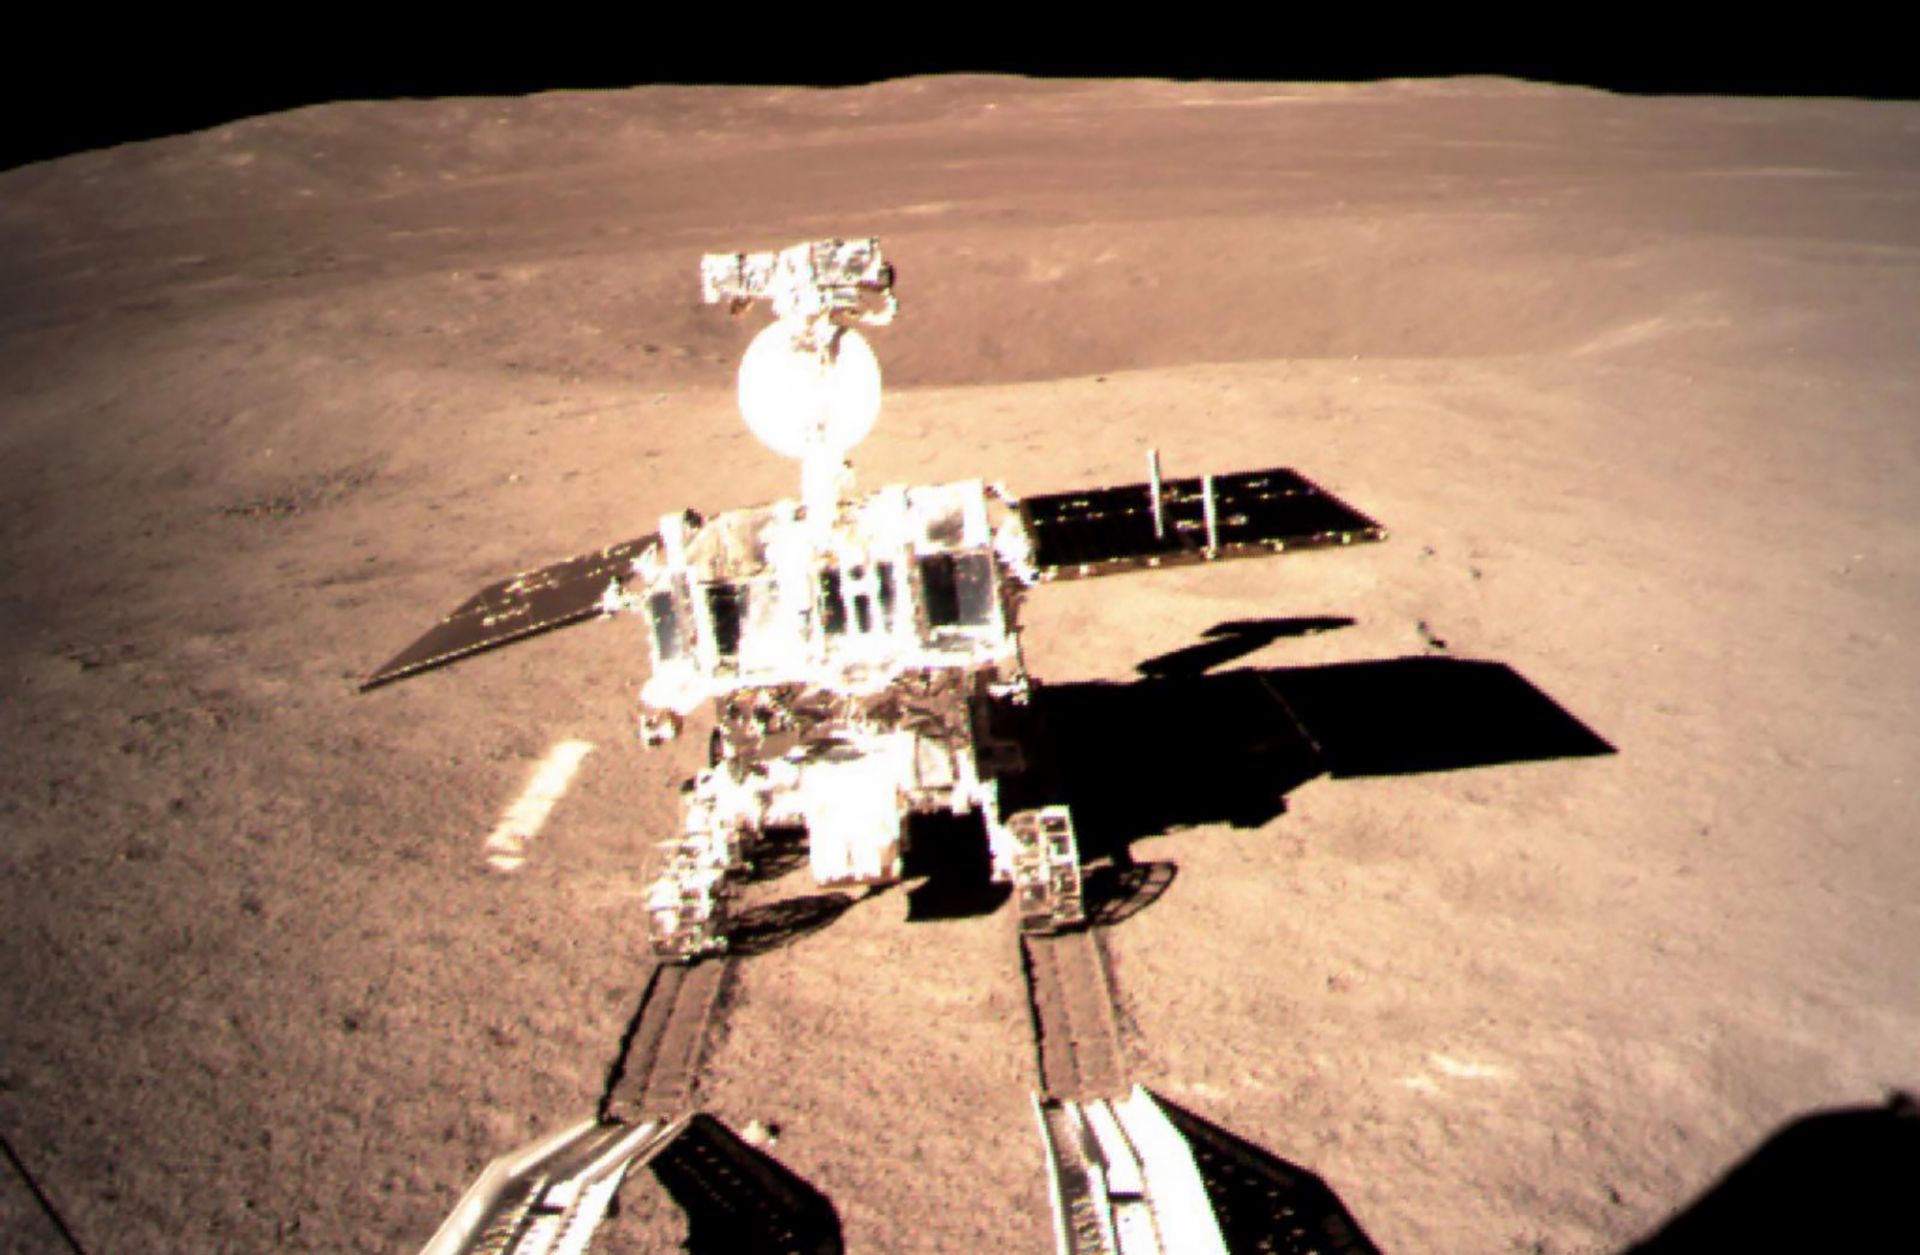 A Chinese lunar rover begins exploring the far side of the moon on Jan. 3, 2019.